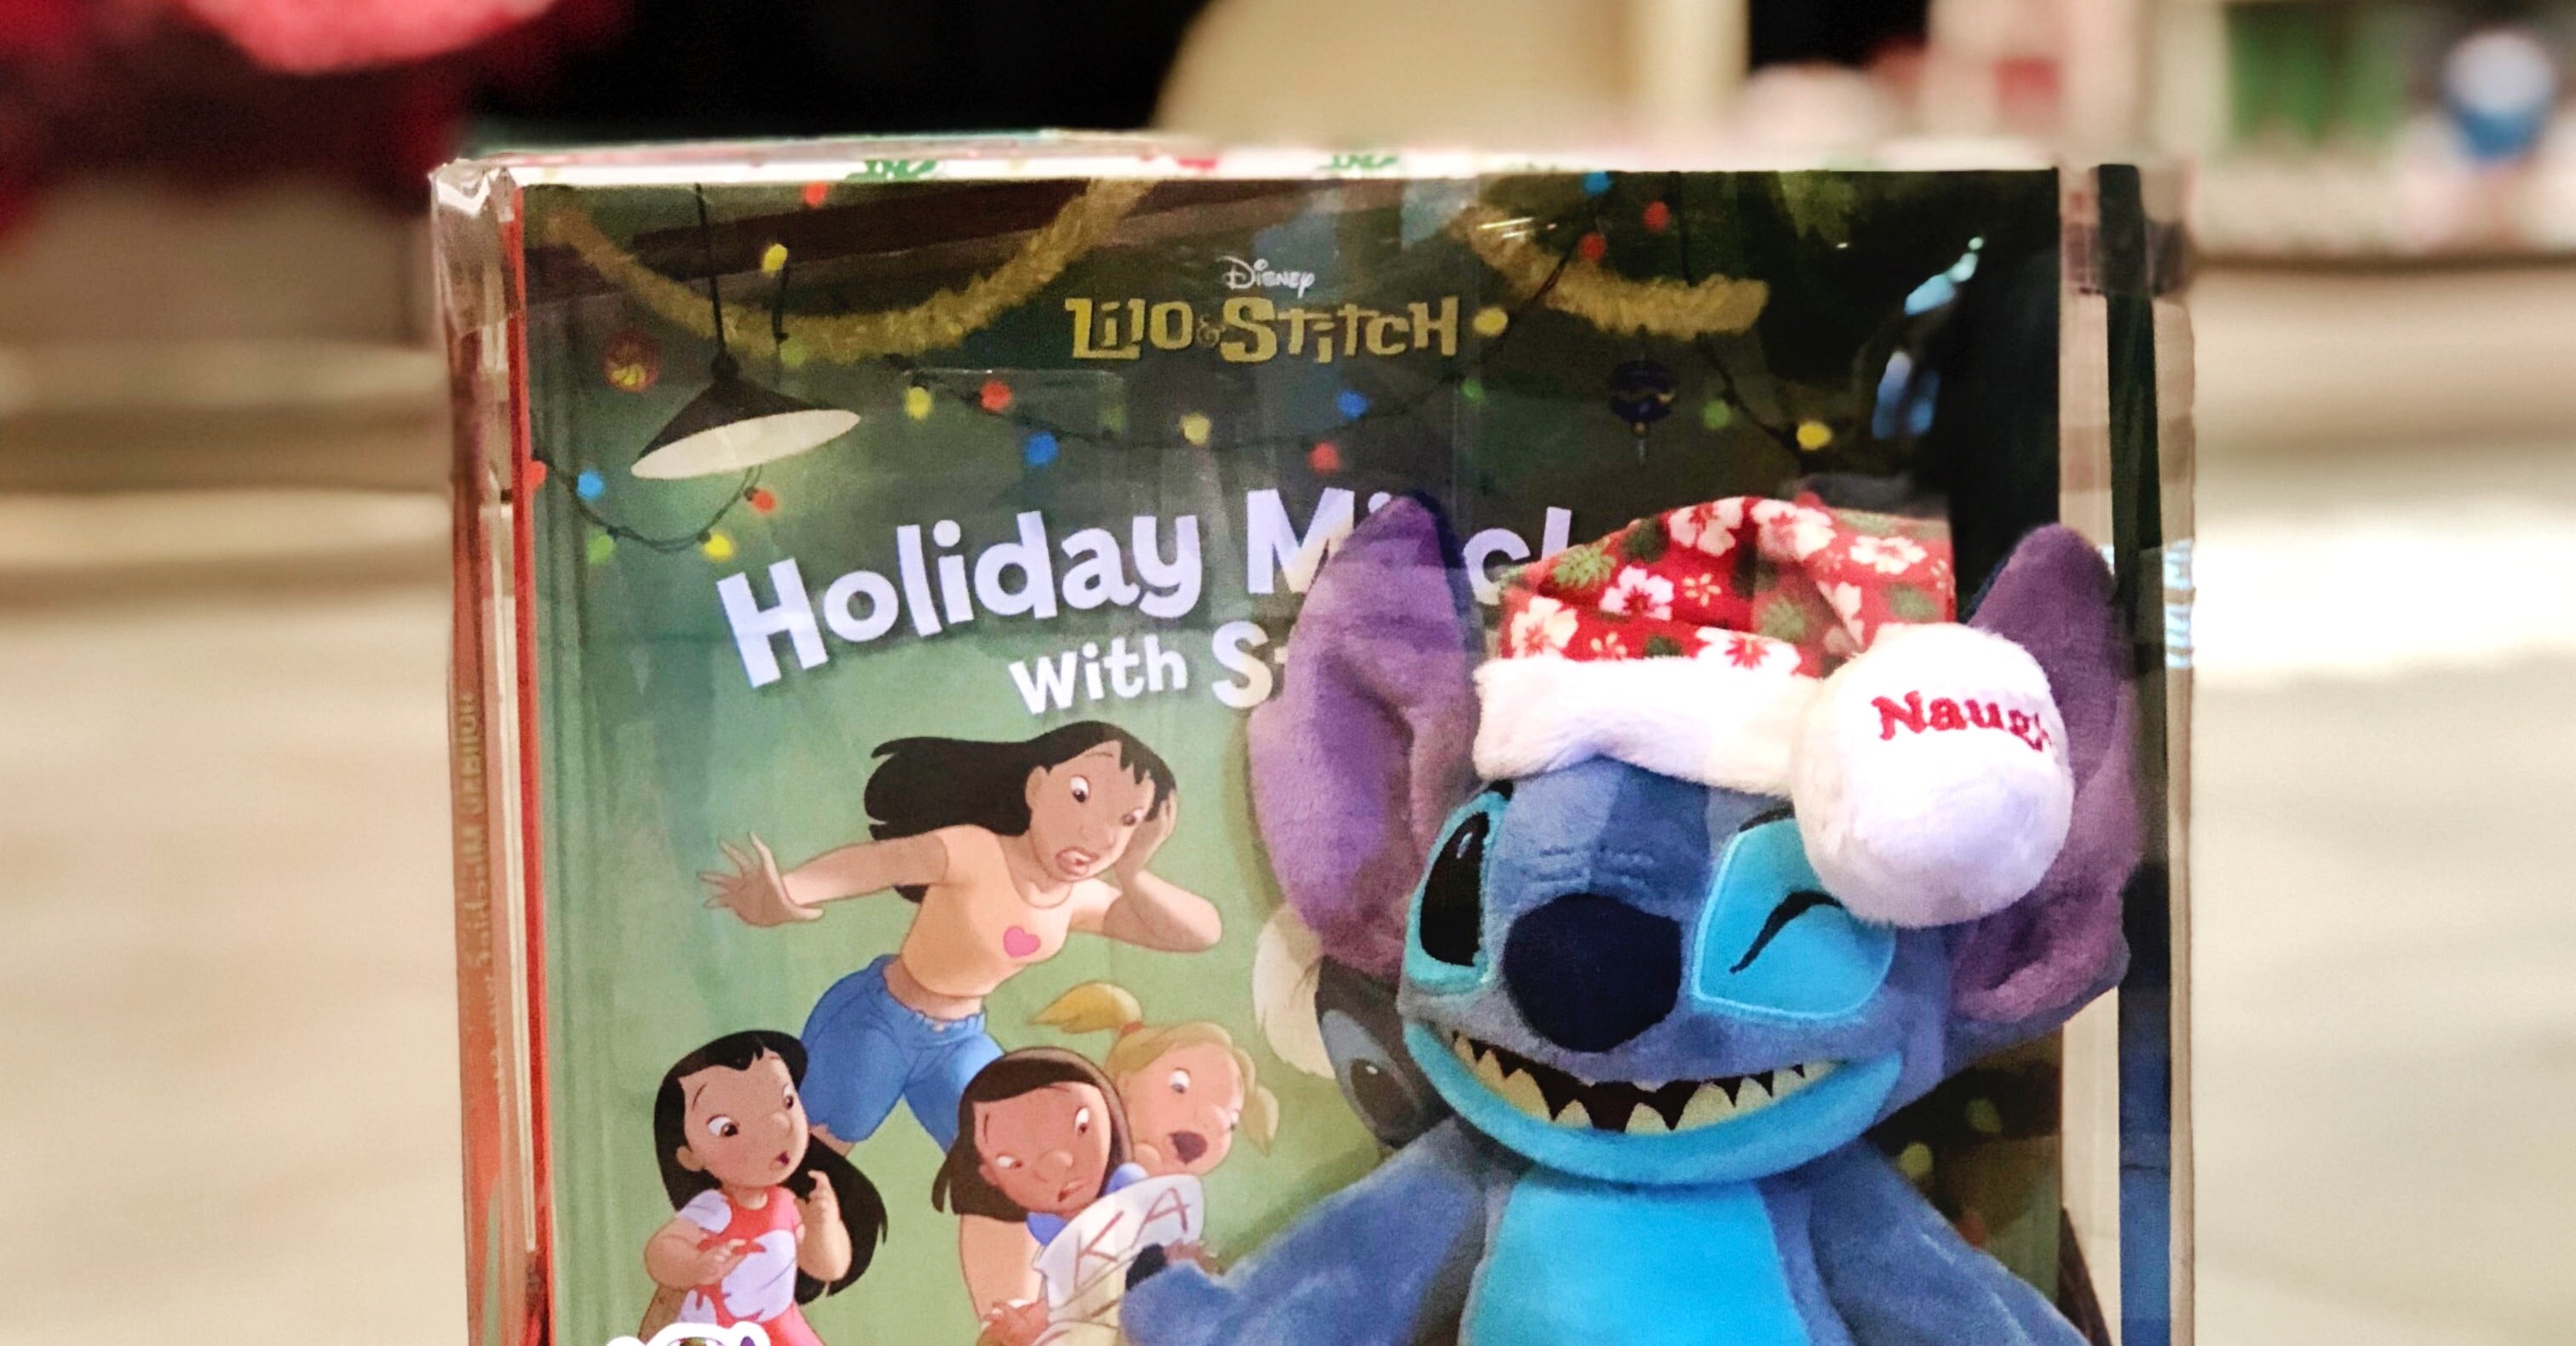 We Have a Feeling Disney's New Stitch Merch Won't Be in Stock for Long! 